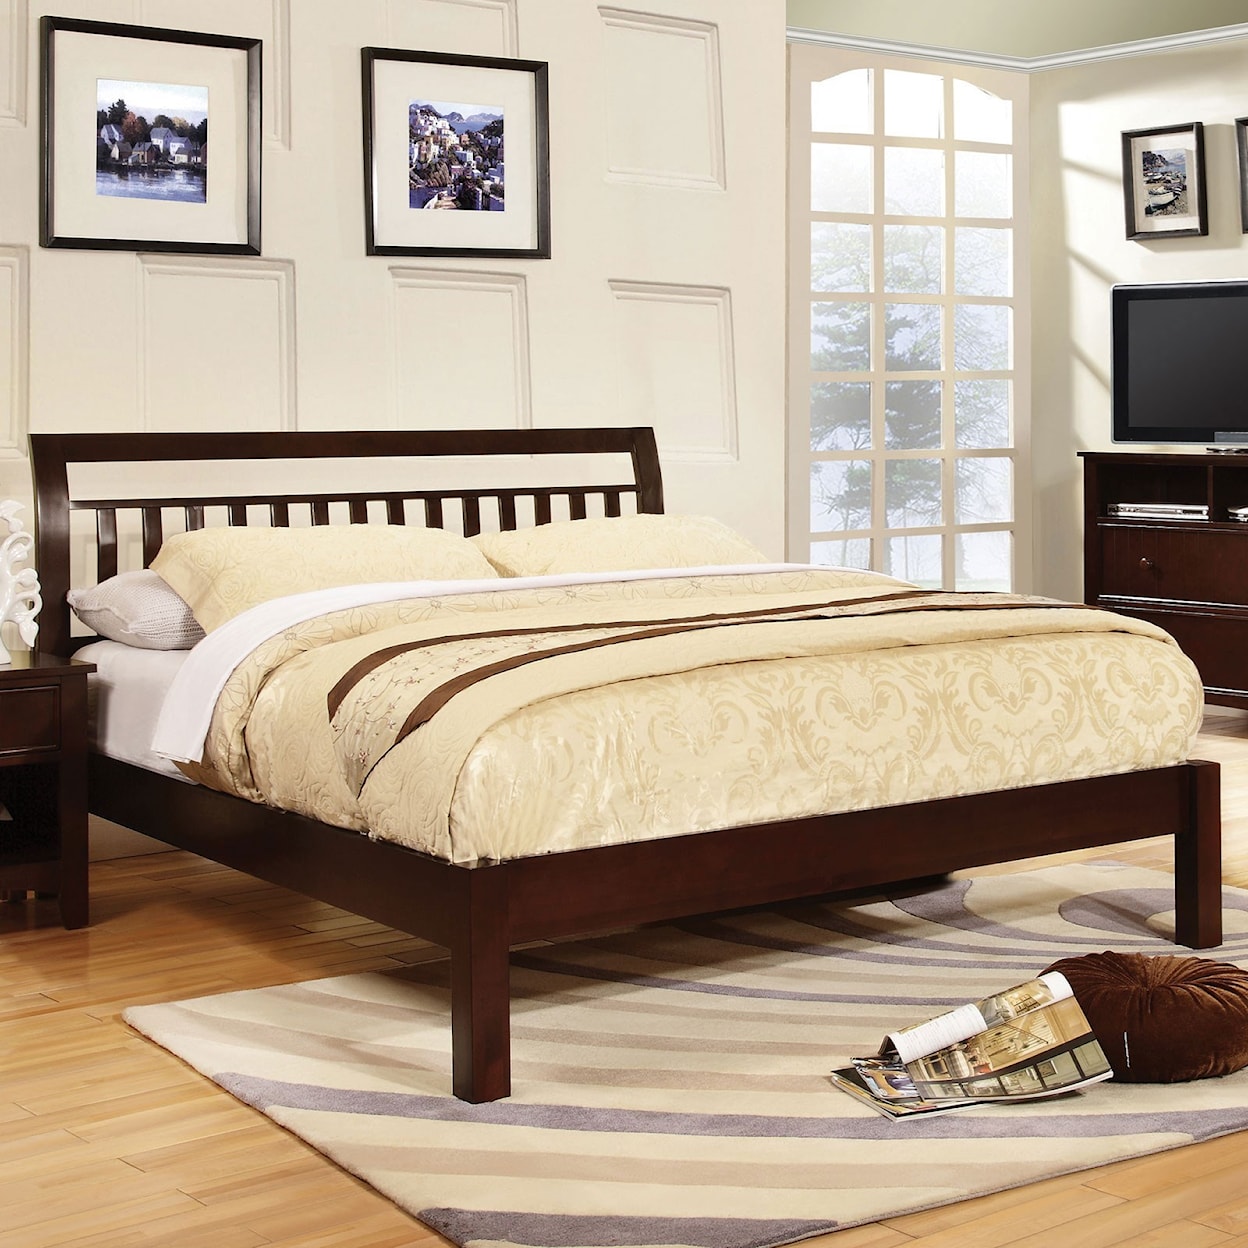 FUSA Corry Full Sleigh Bed